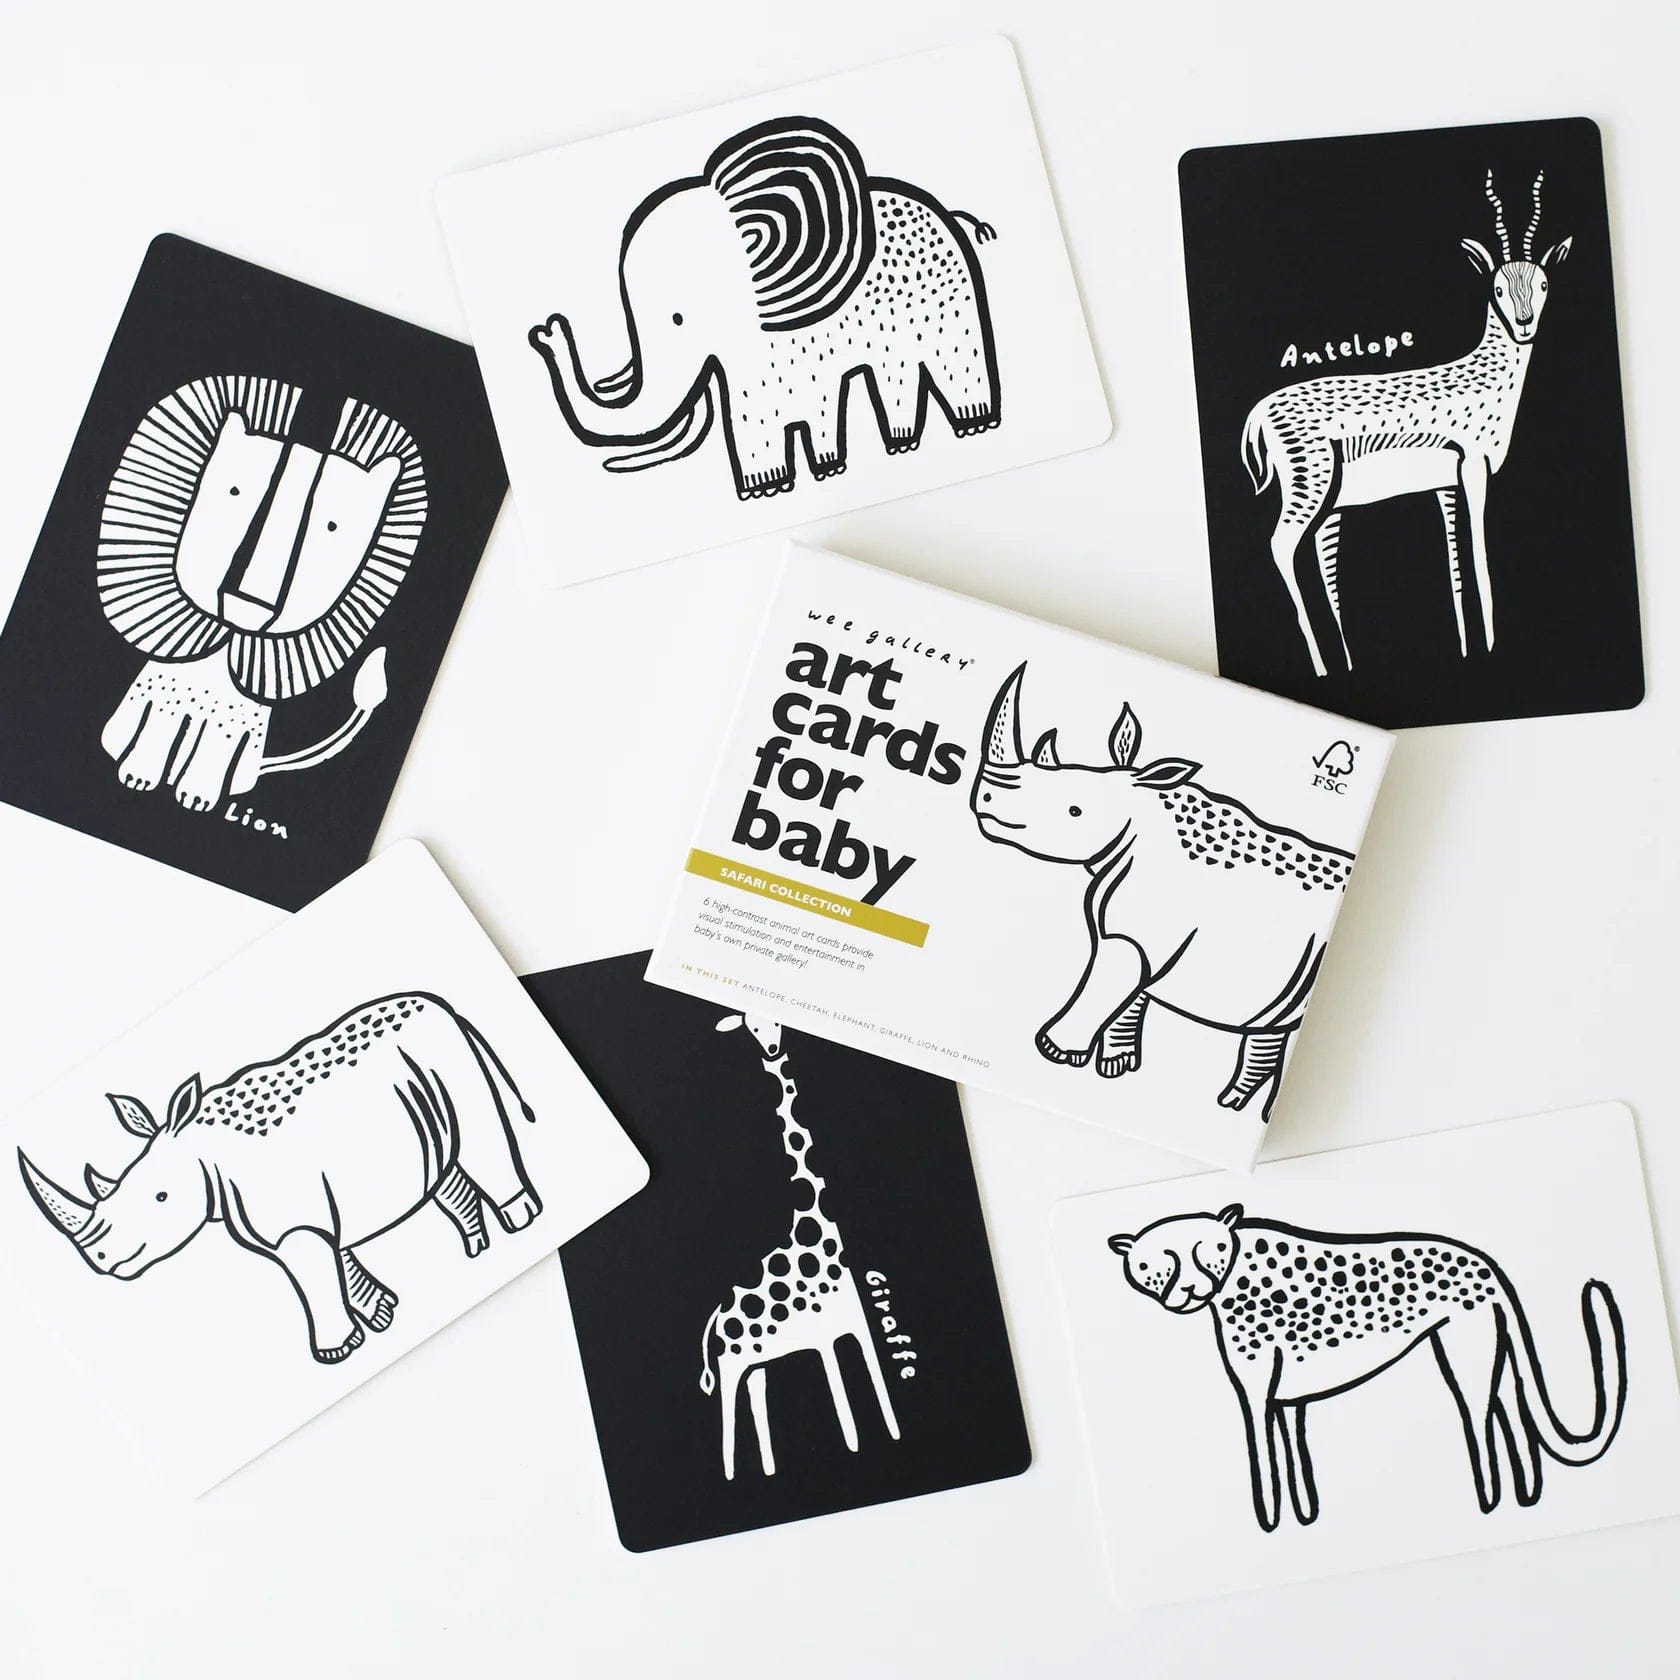 Wee Gallery Accessory Safari Art Cards Wee Gallery Safari Art Cards